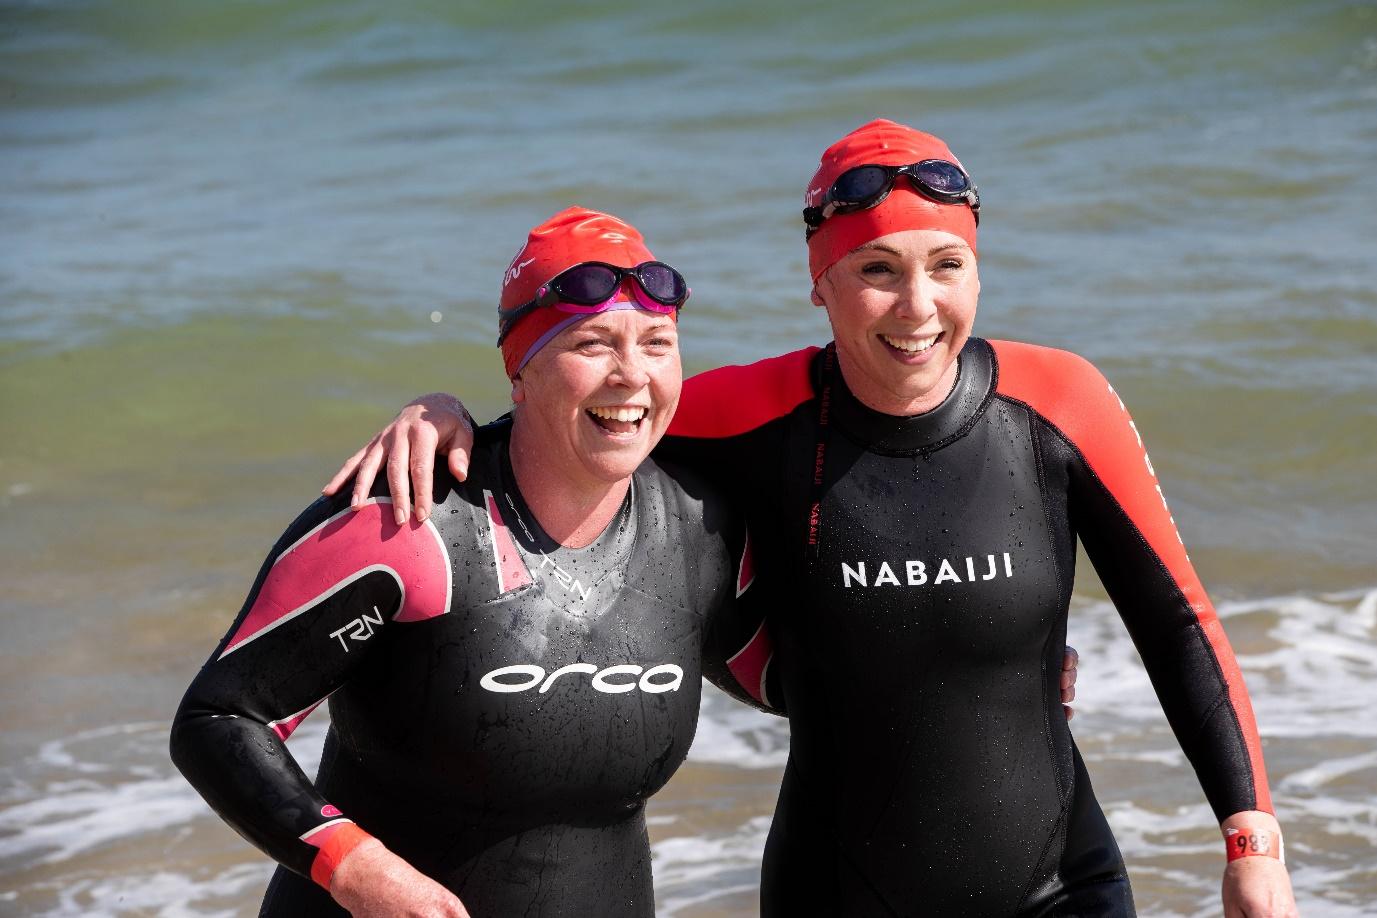 We’re going to the BHF Bournemouth Pier to Pier Swim – Are You?